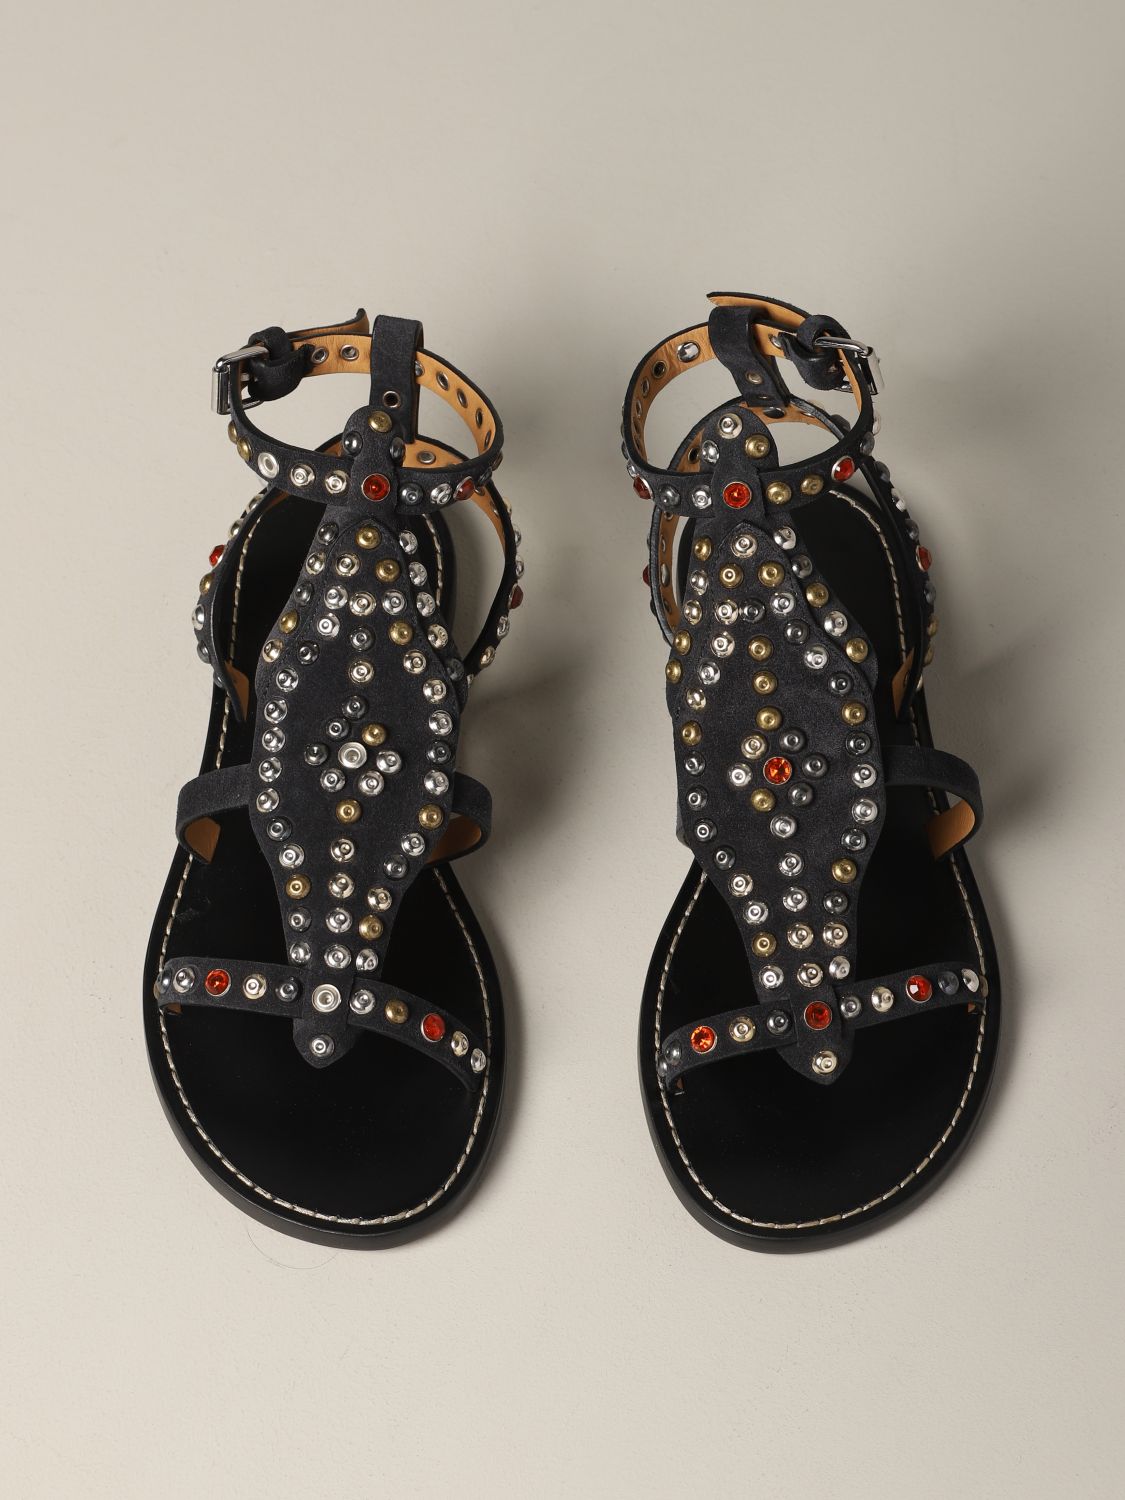 Isabel Marant Outlet: sandal in leather with studs and rhinestones | Flat Sandals Isabel Marant Women Black | Sandals Isabel Marant SD049420P016S GIGLIO.COM